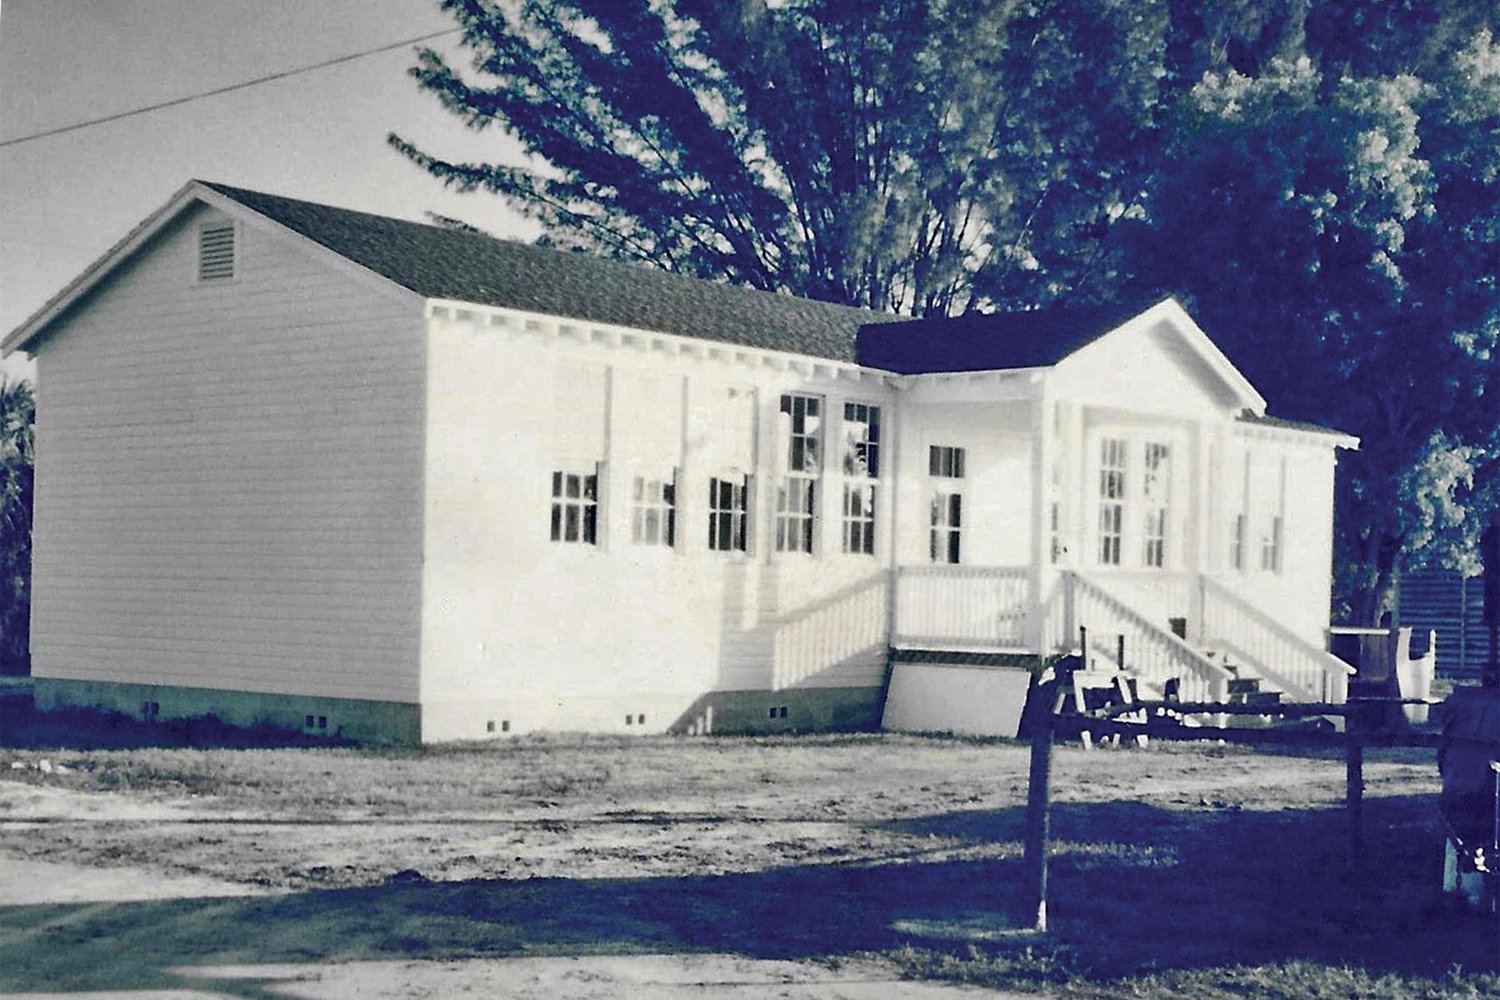 The Loxahatchee Schoolhouse will be commemorated as the first structure to arrive at Yesteryear Village in 1990.